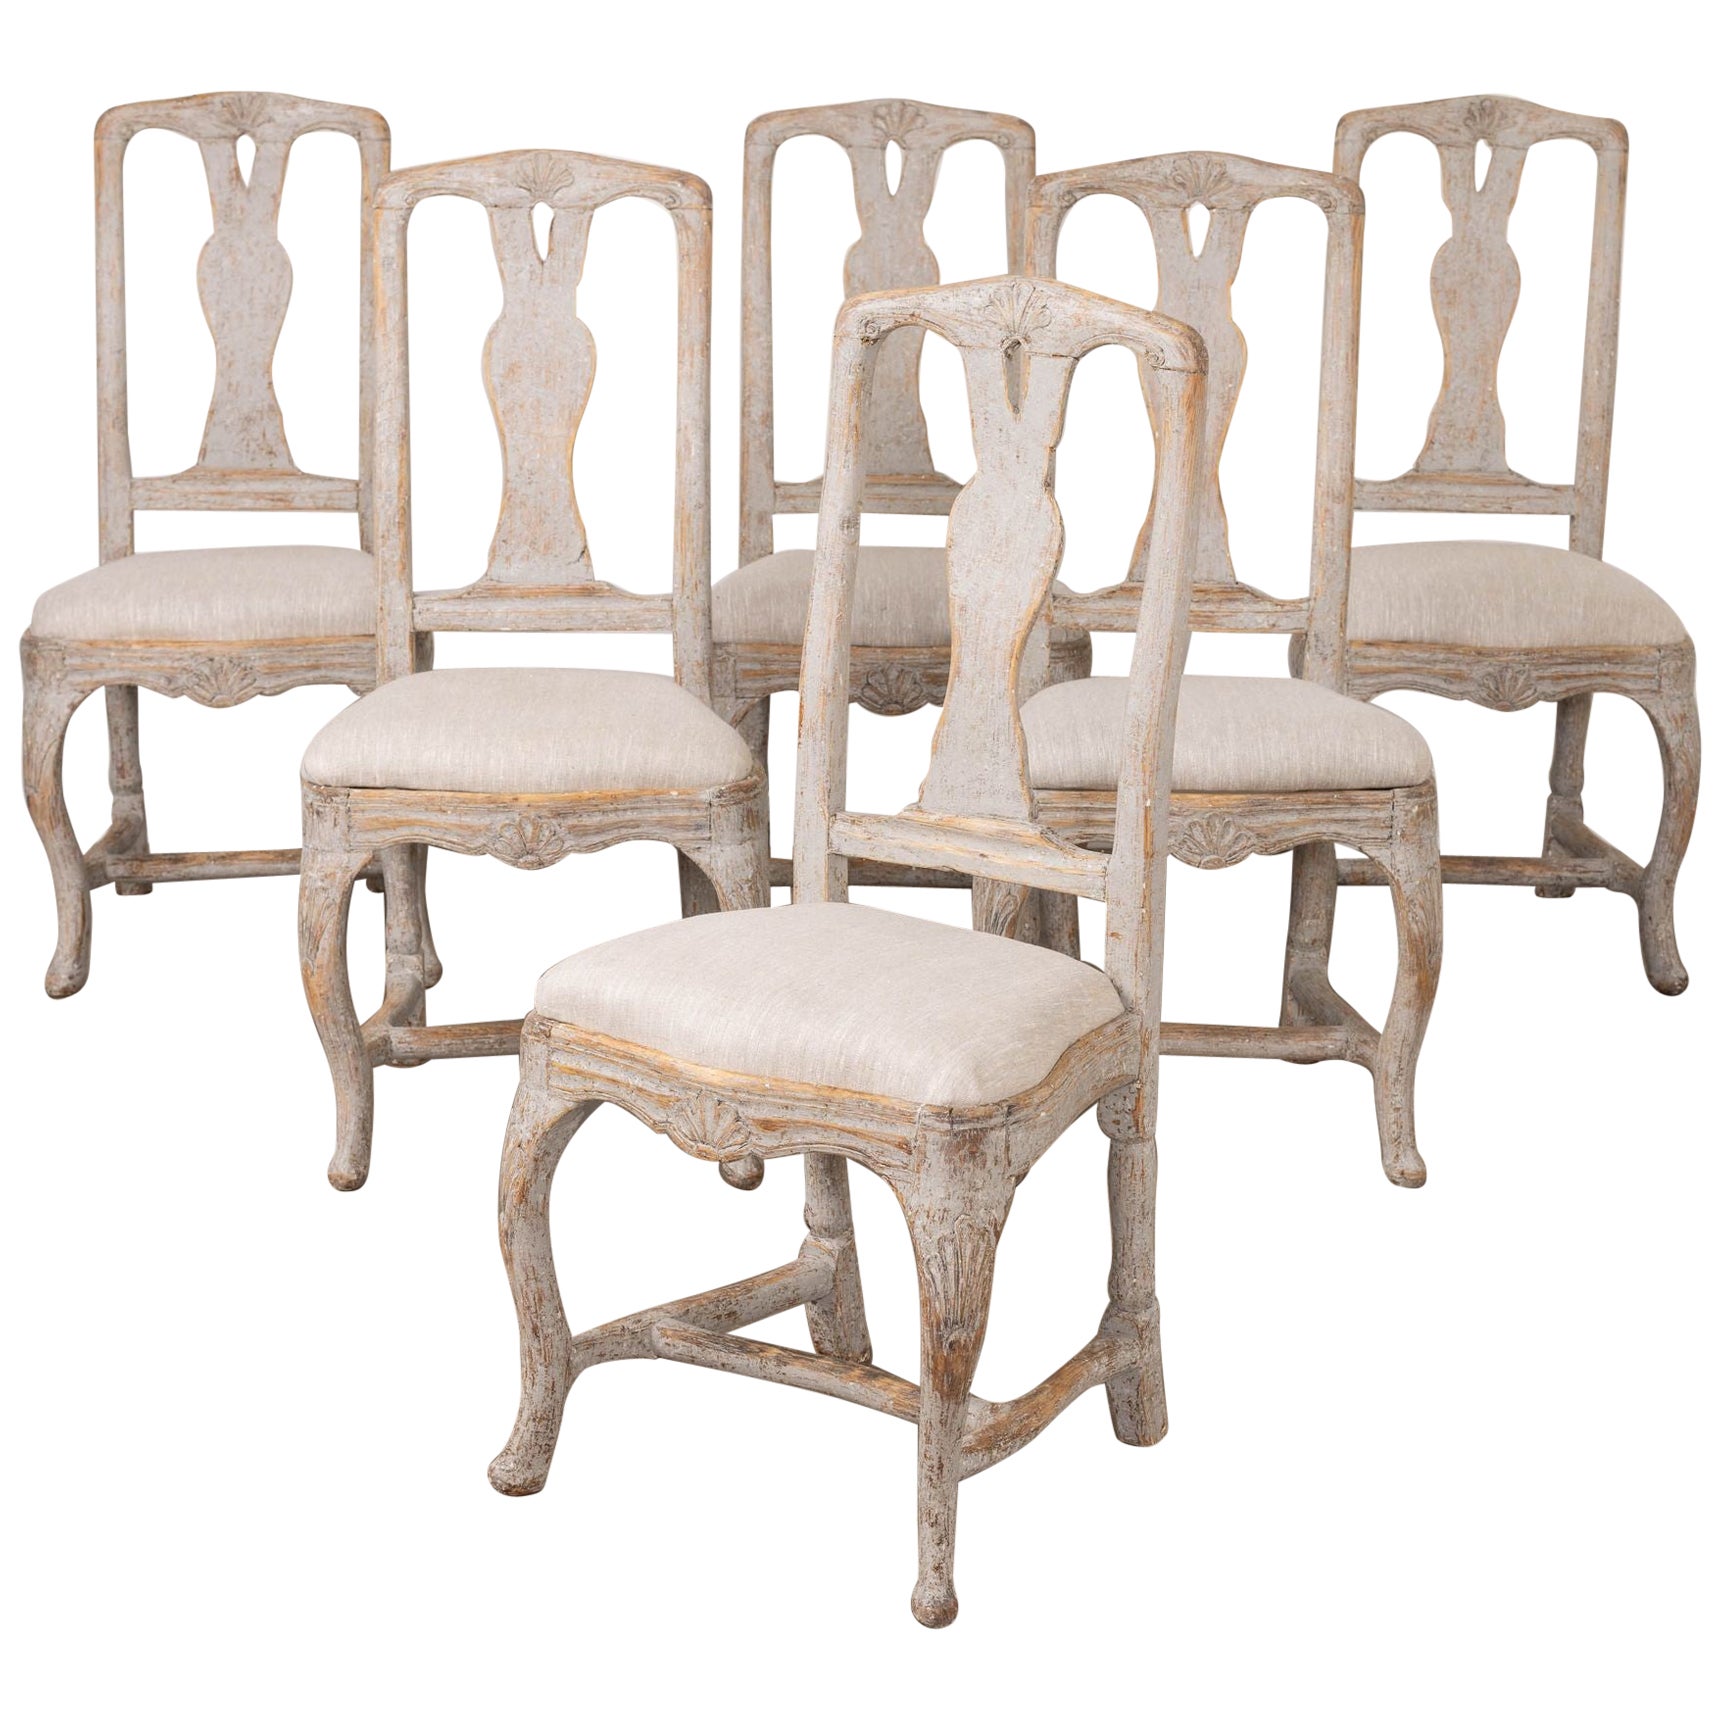 18th c. Swedish Rococo Period Painted Dining Chairs with Slip Seats